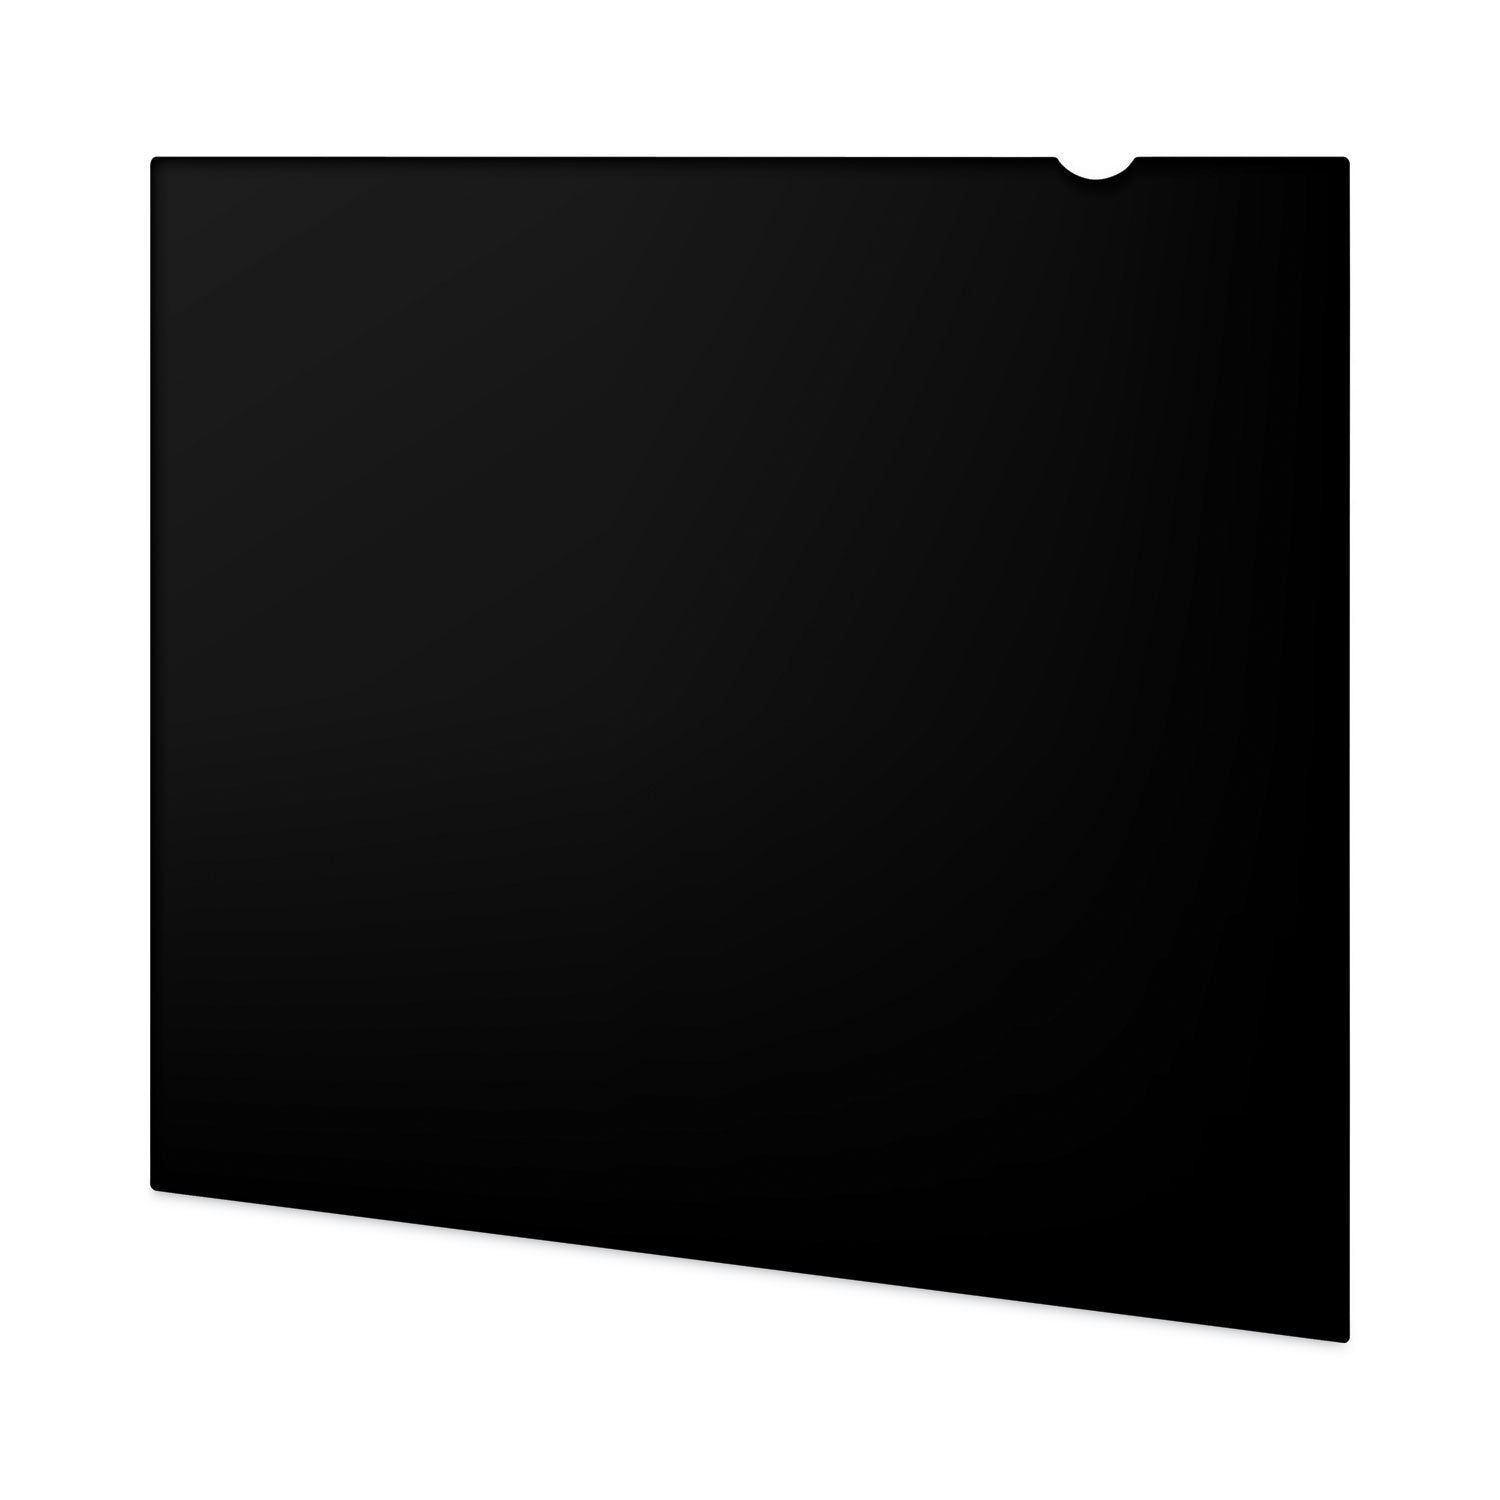 Blackout Privacy Filter for 19" Widescreen Flat Panel Monitor, 16:10 Aspect Ratio - 